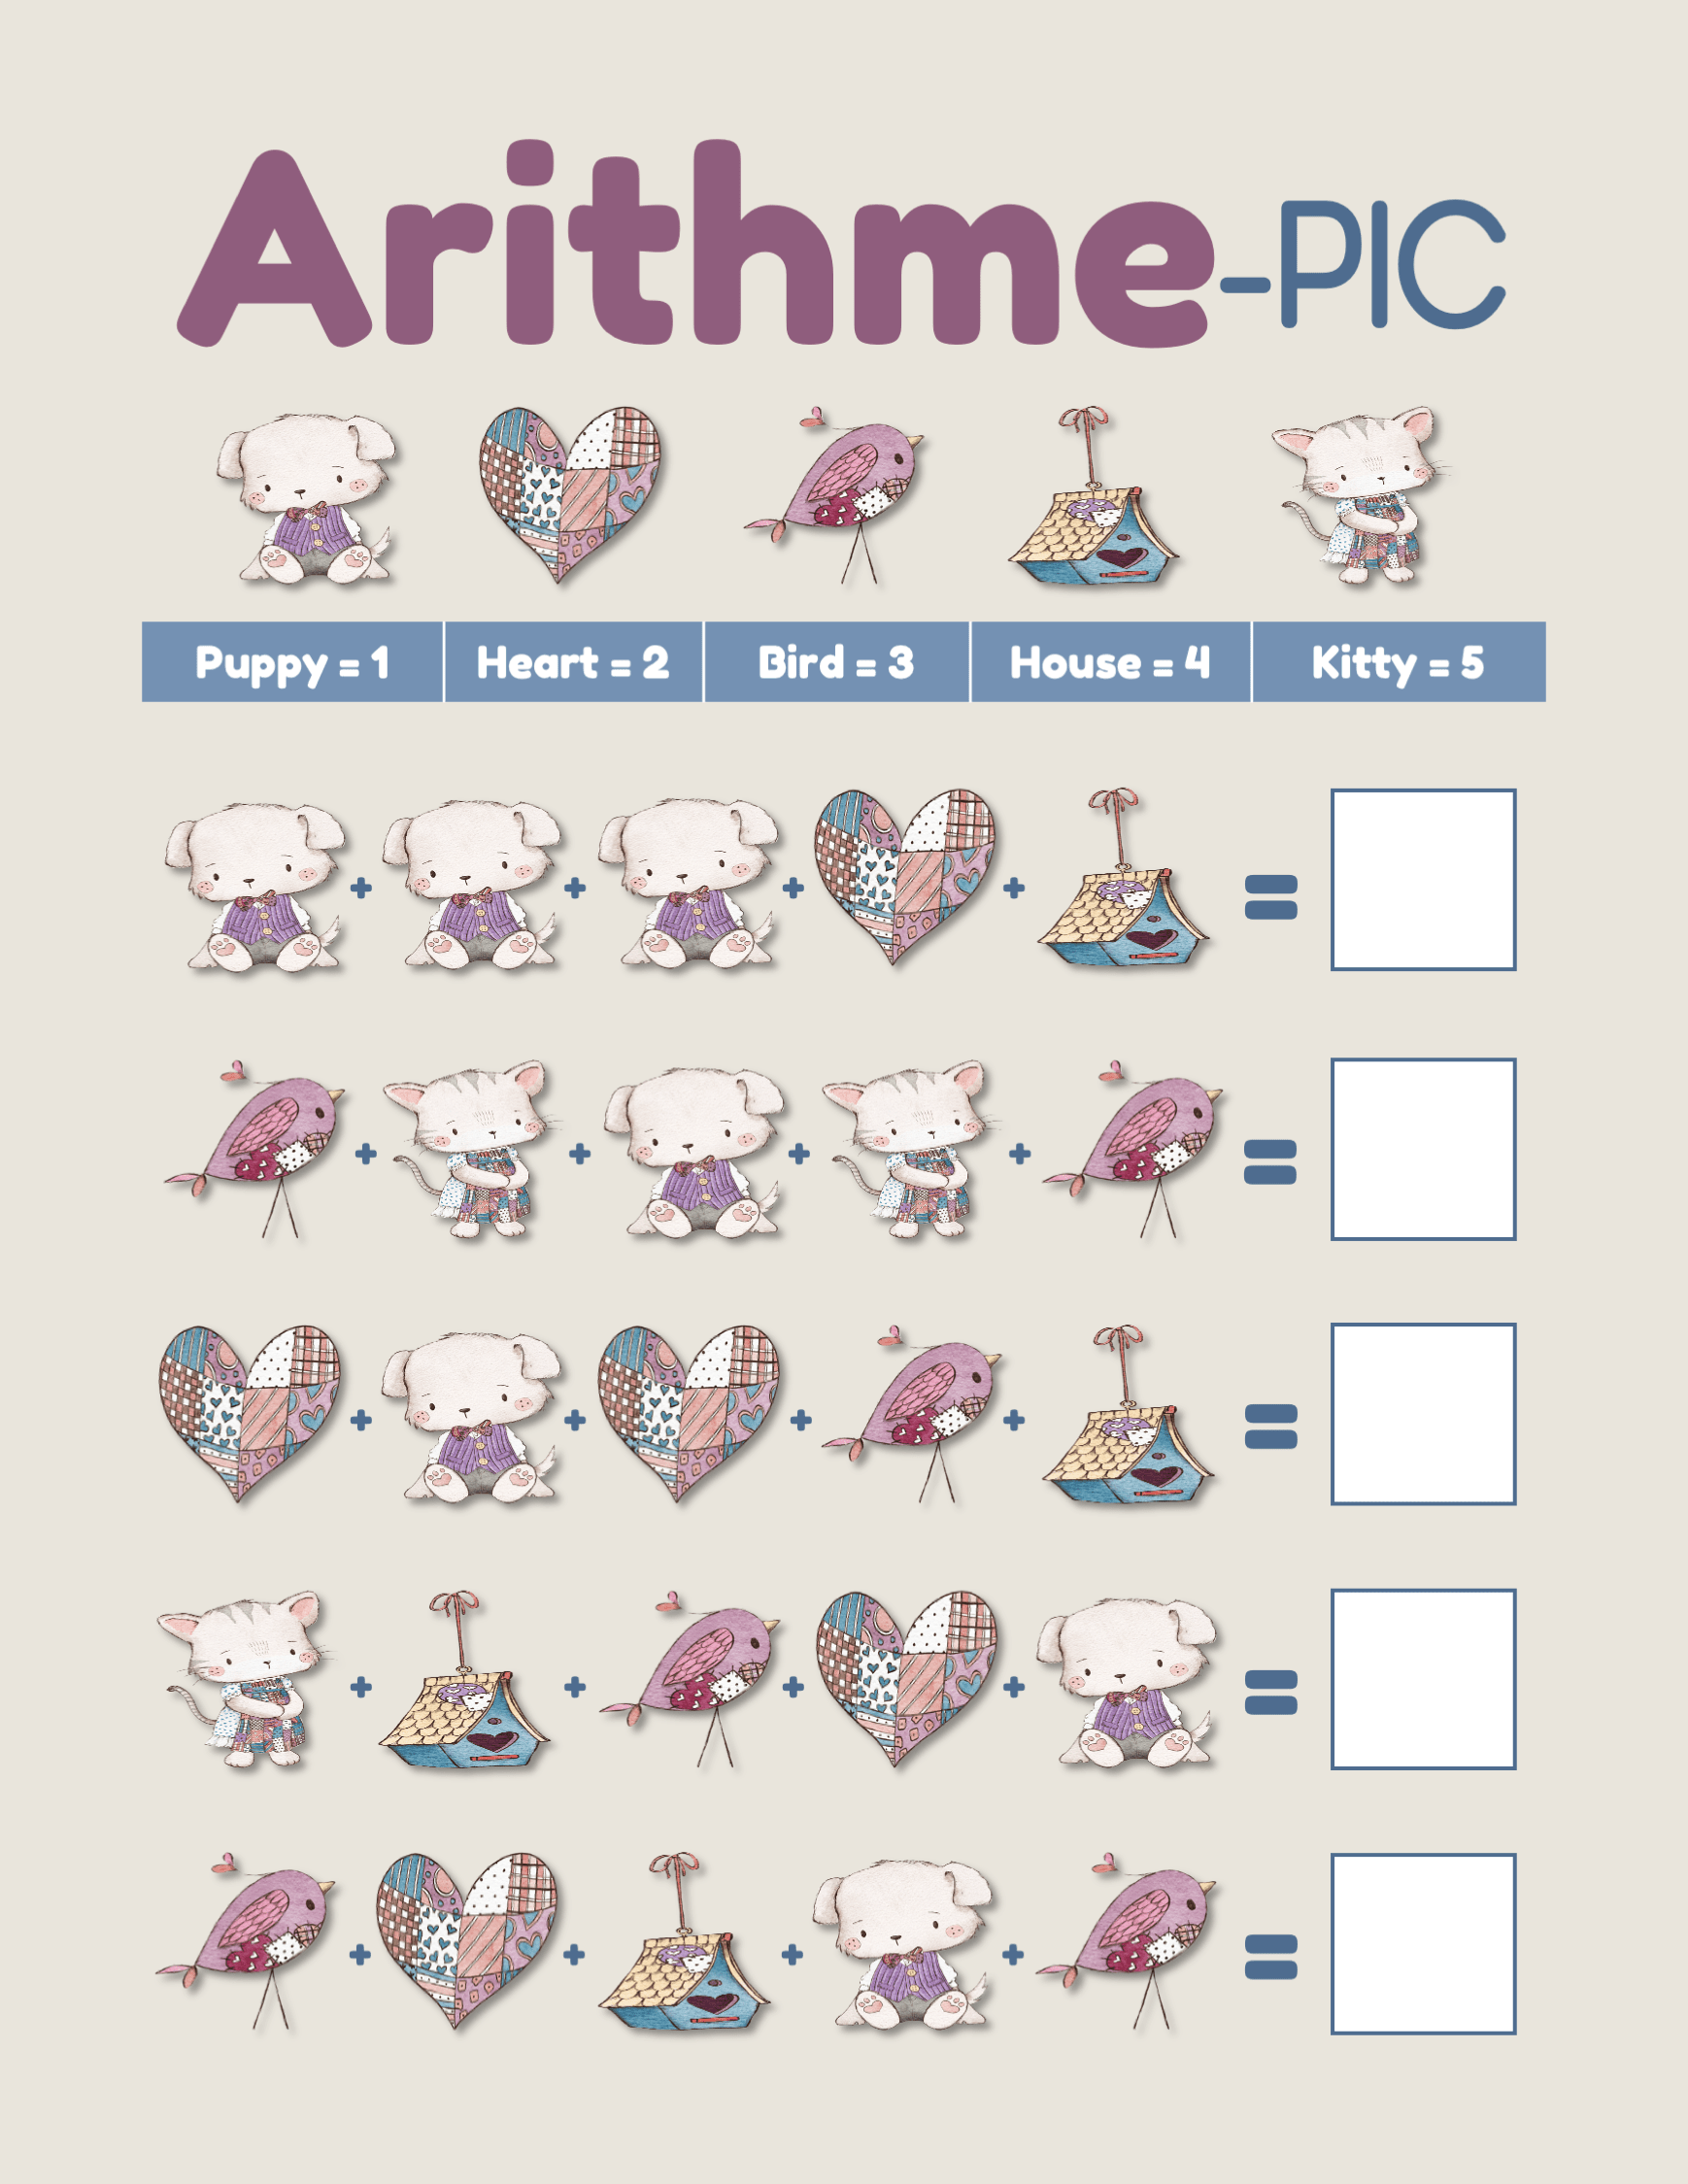 The Arithme-Pic Game...Get it?  Arithmetic with Pictures?